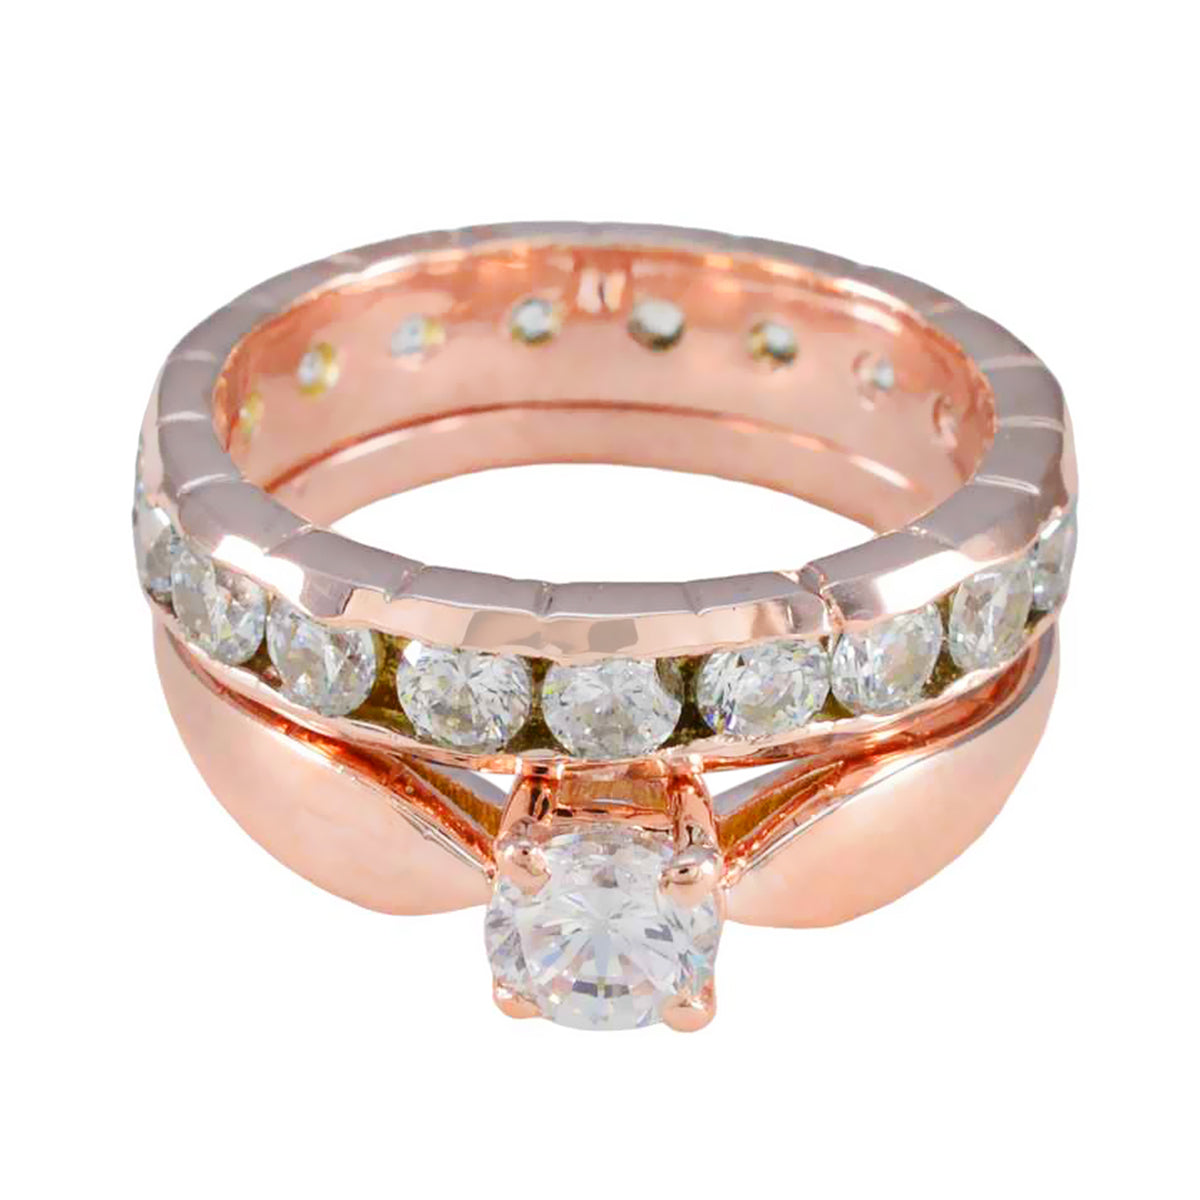 Riyo Overall Silver Ring With Rose Gold Plating White CZ Stone Round Shape Prong Setting Designer Jewelry Wedding Ring